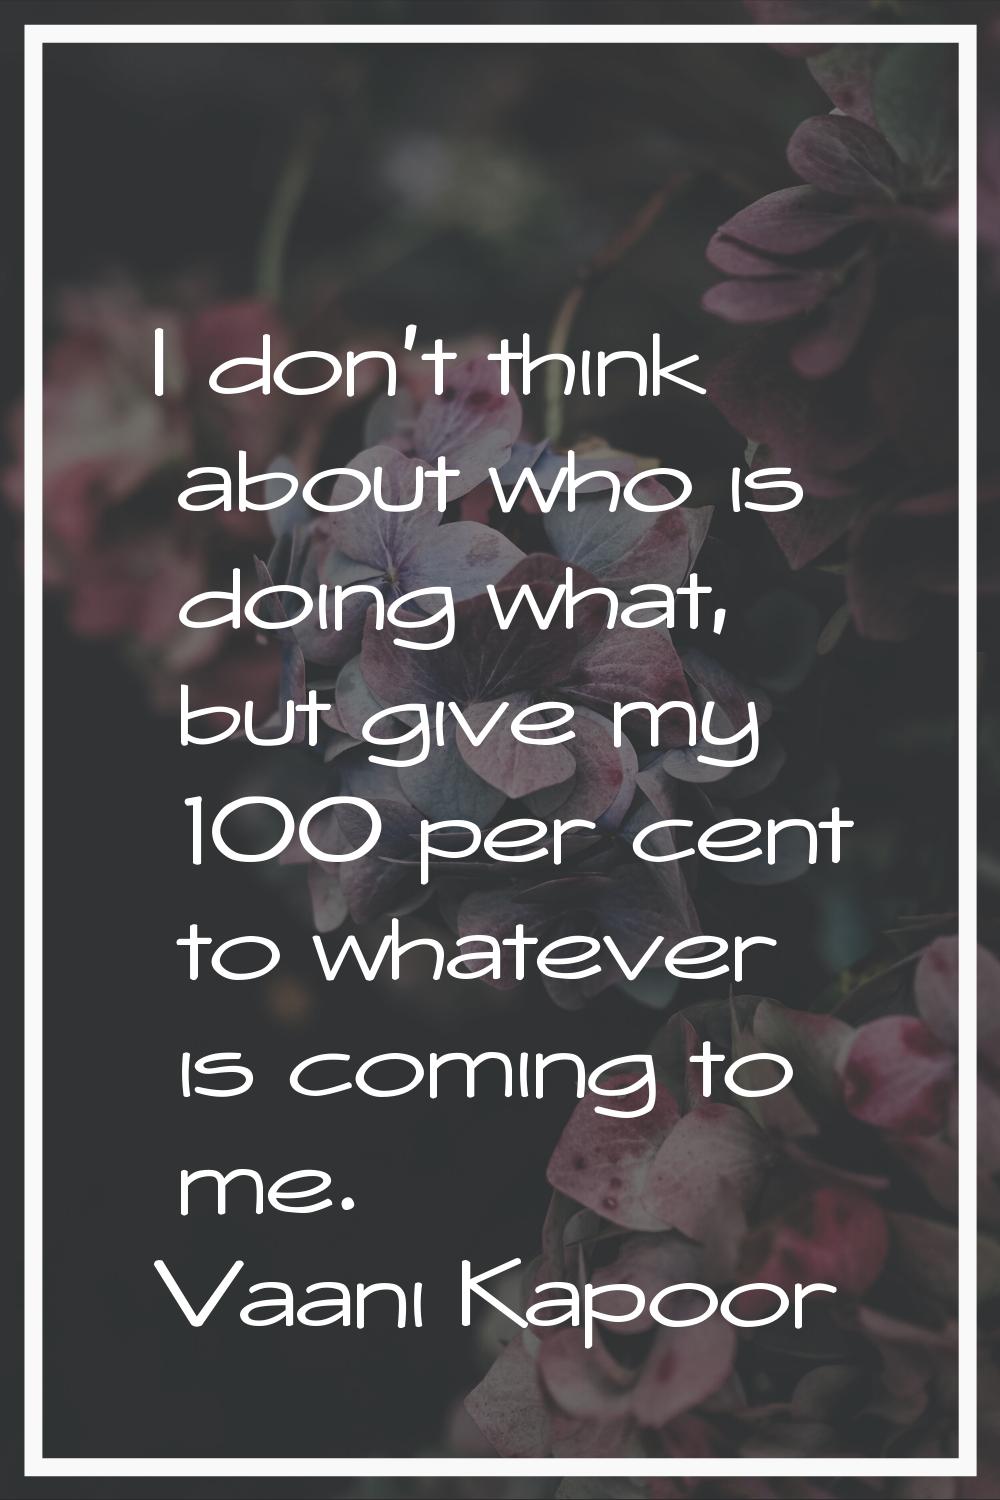 I don't think about who is doing what, but give my 100 per cent to whatever is coming to me.